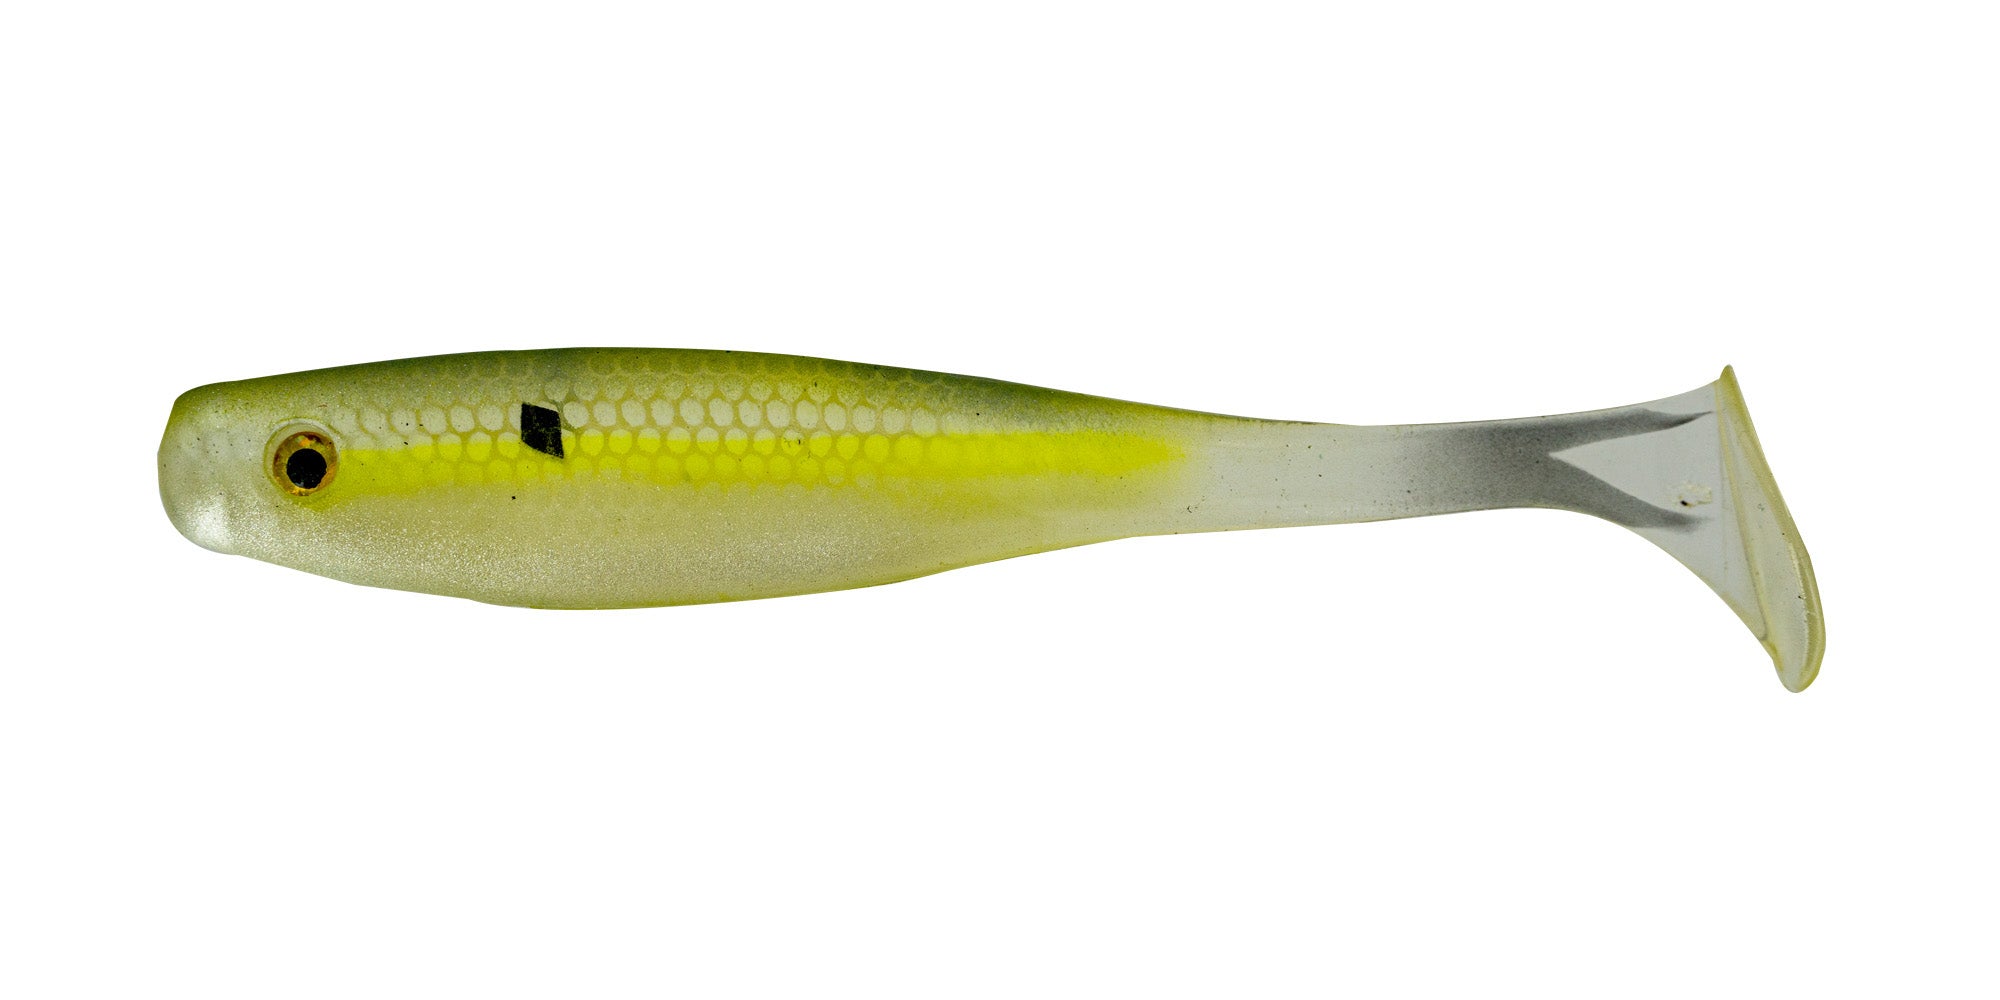 Big Bite Baits Fishing Lures - A 3.5 Suicide Shad will fit in the